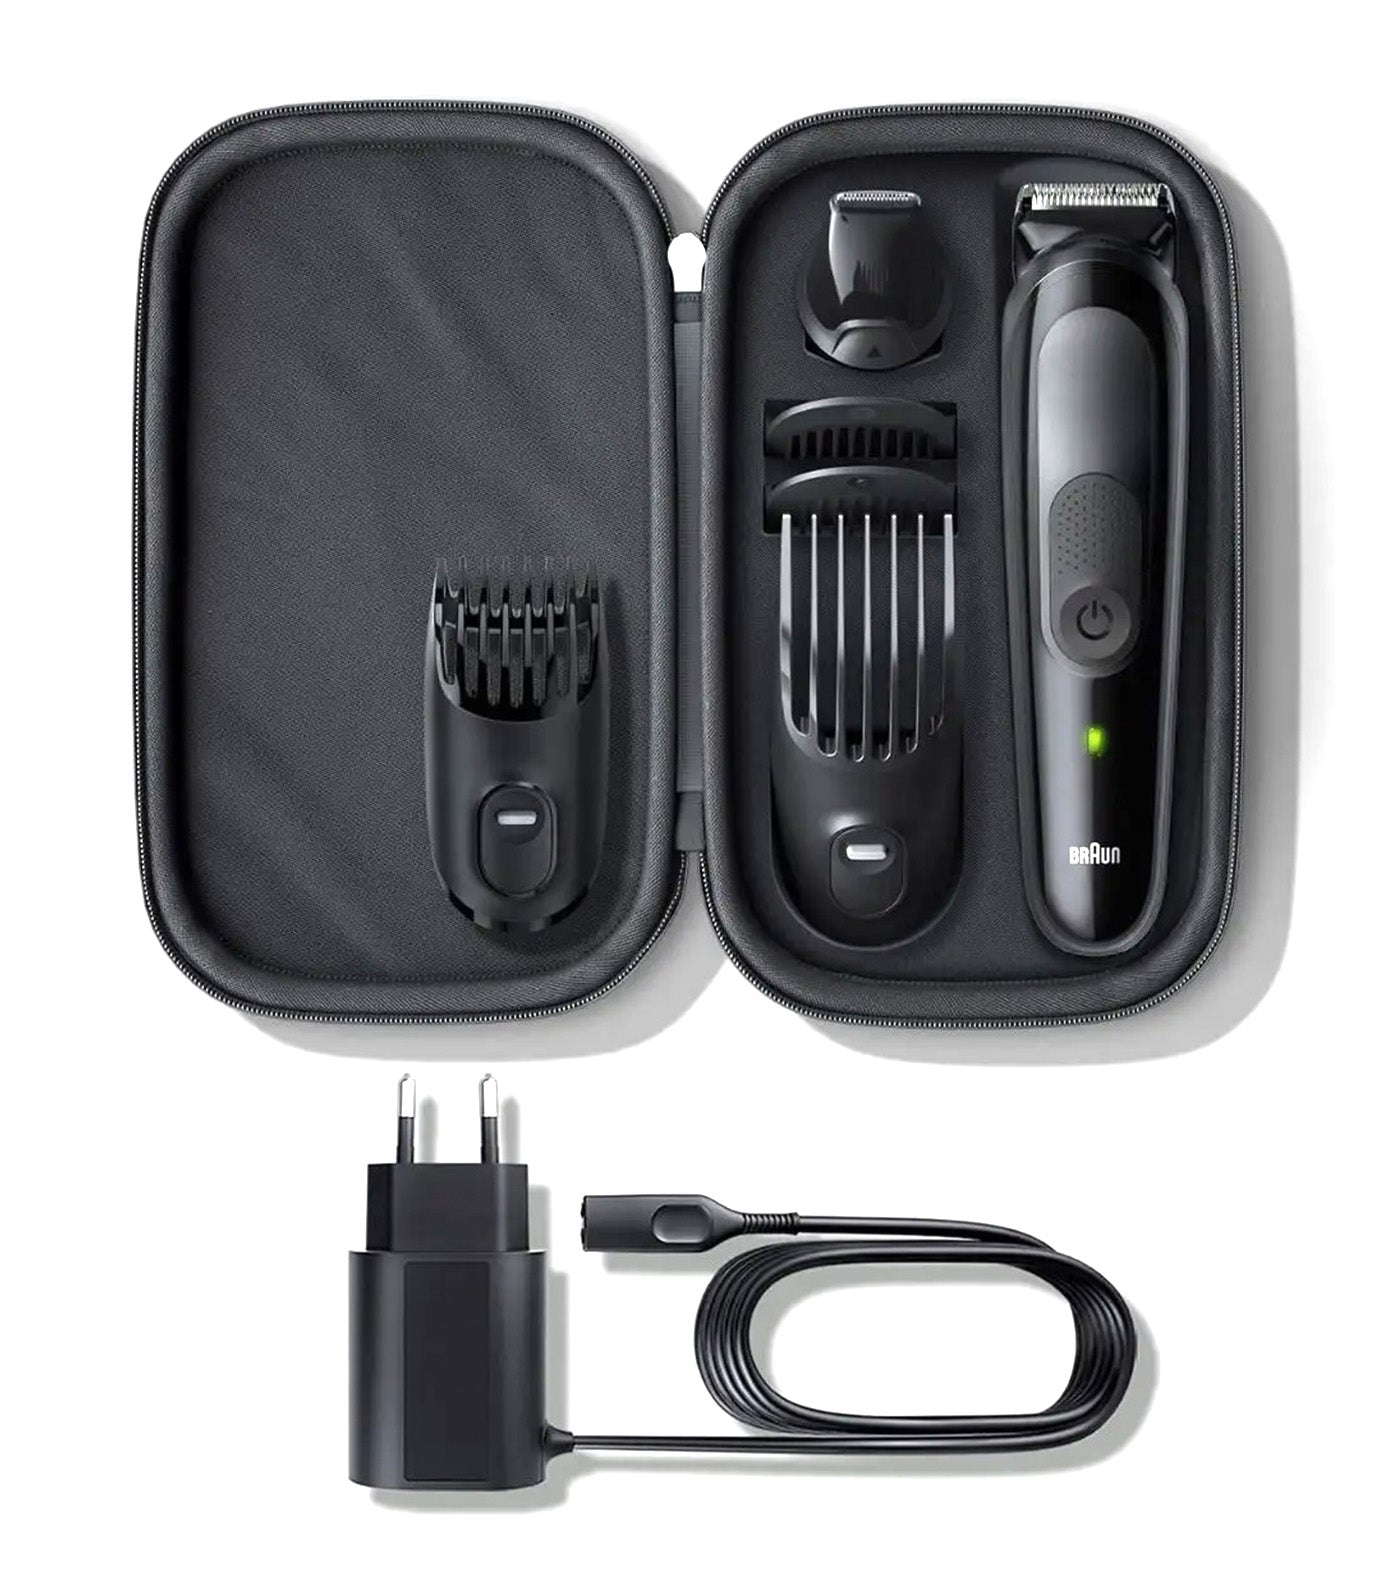 6-In-1 Styling Kit Precise Styling For Face and Head 100 Years Limited Edition with Travel Case Black